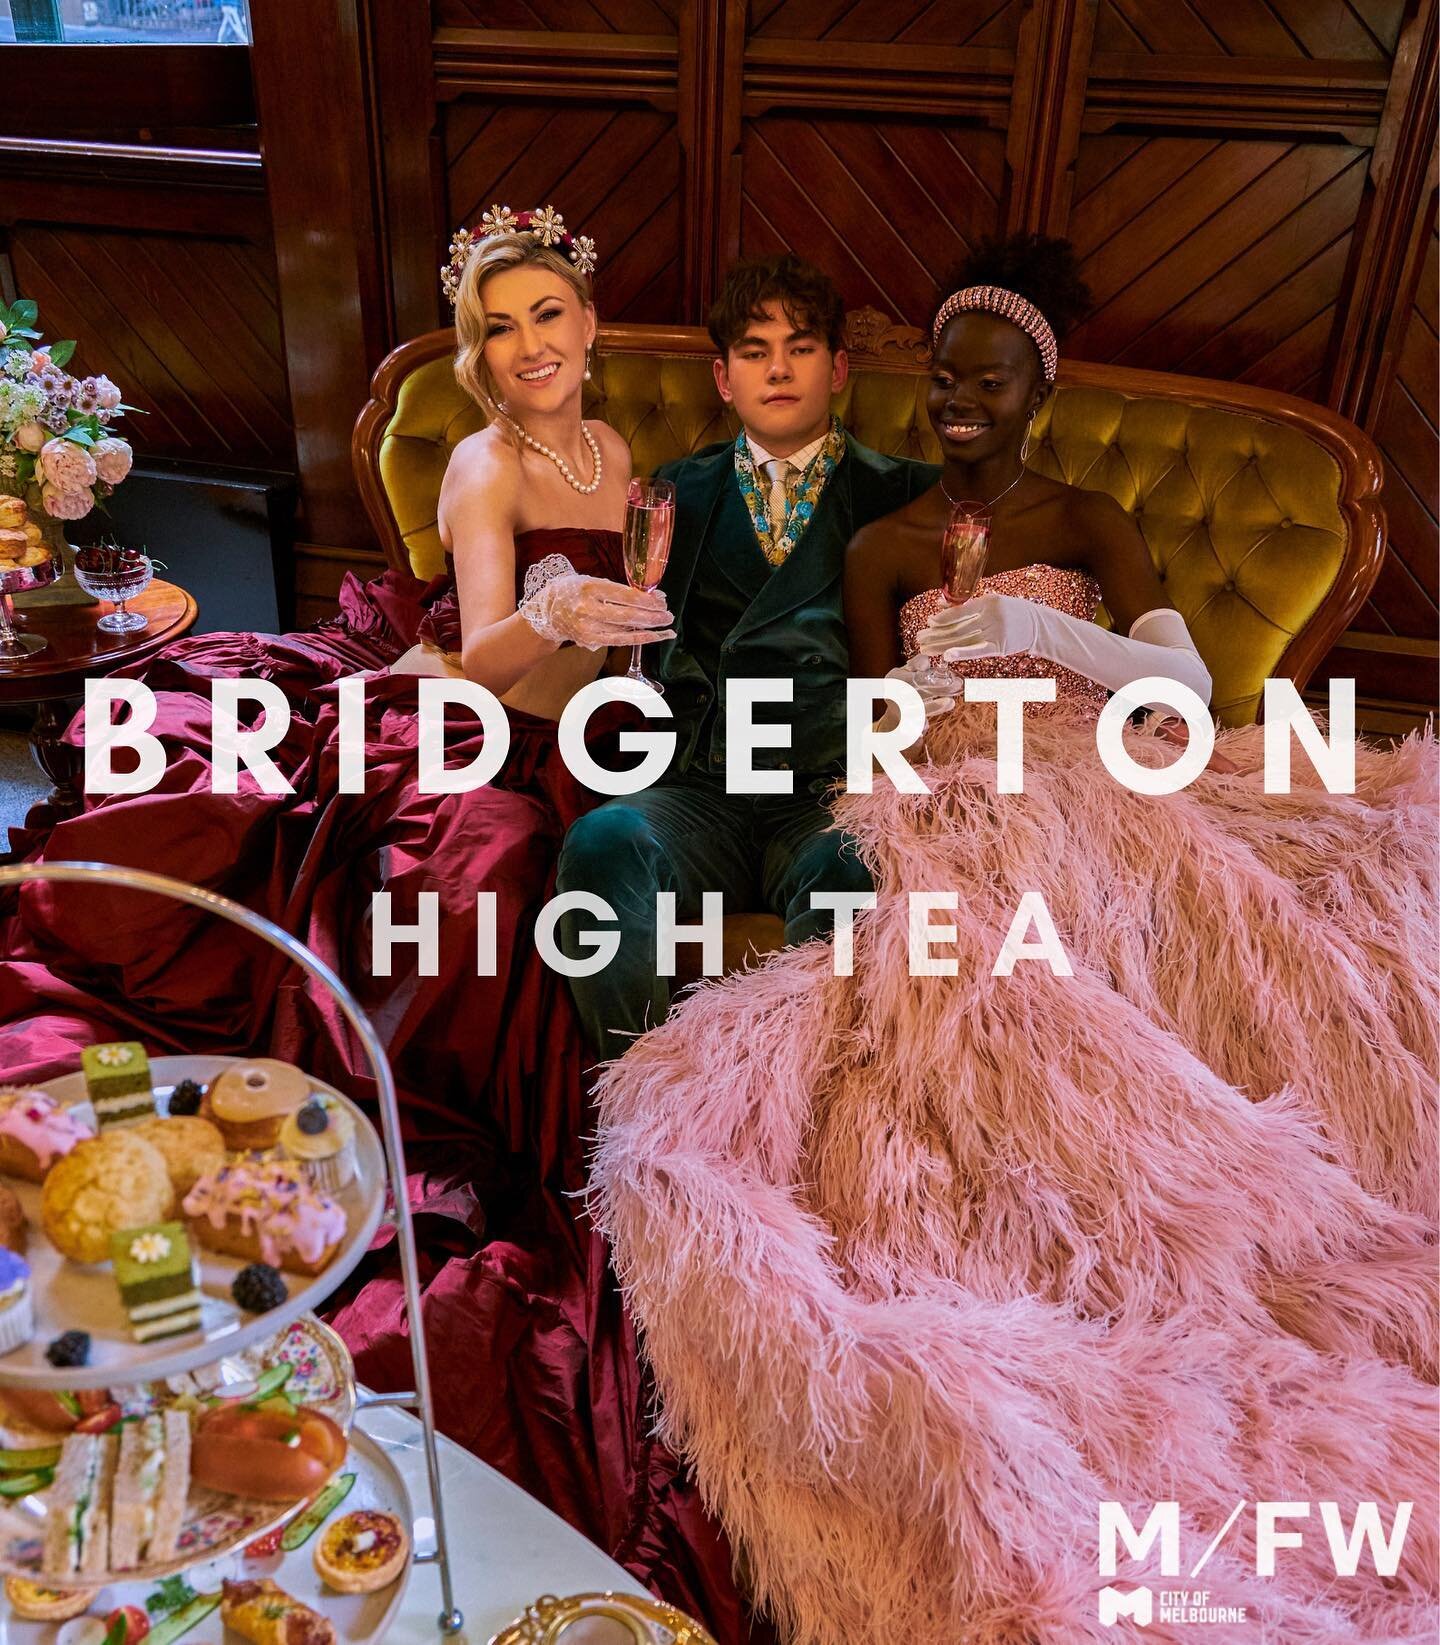 Journey back to the Regency era and live out your Bridgerton fantasy at our Bridgerton High Tea M/FW event. Don your most opulent Bridgerton-inspired outfit and present yourself as a Regency icon to be crowned as best dressed. Visit our events page f